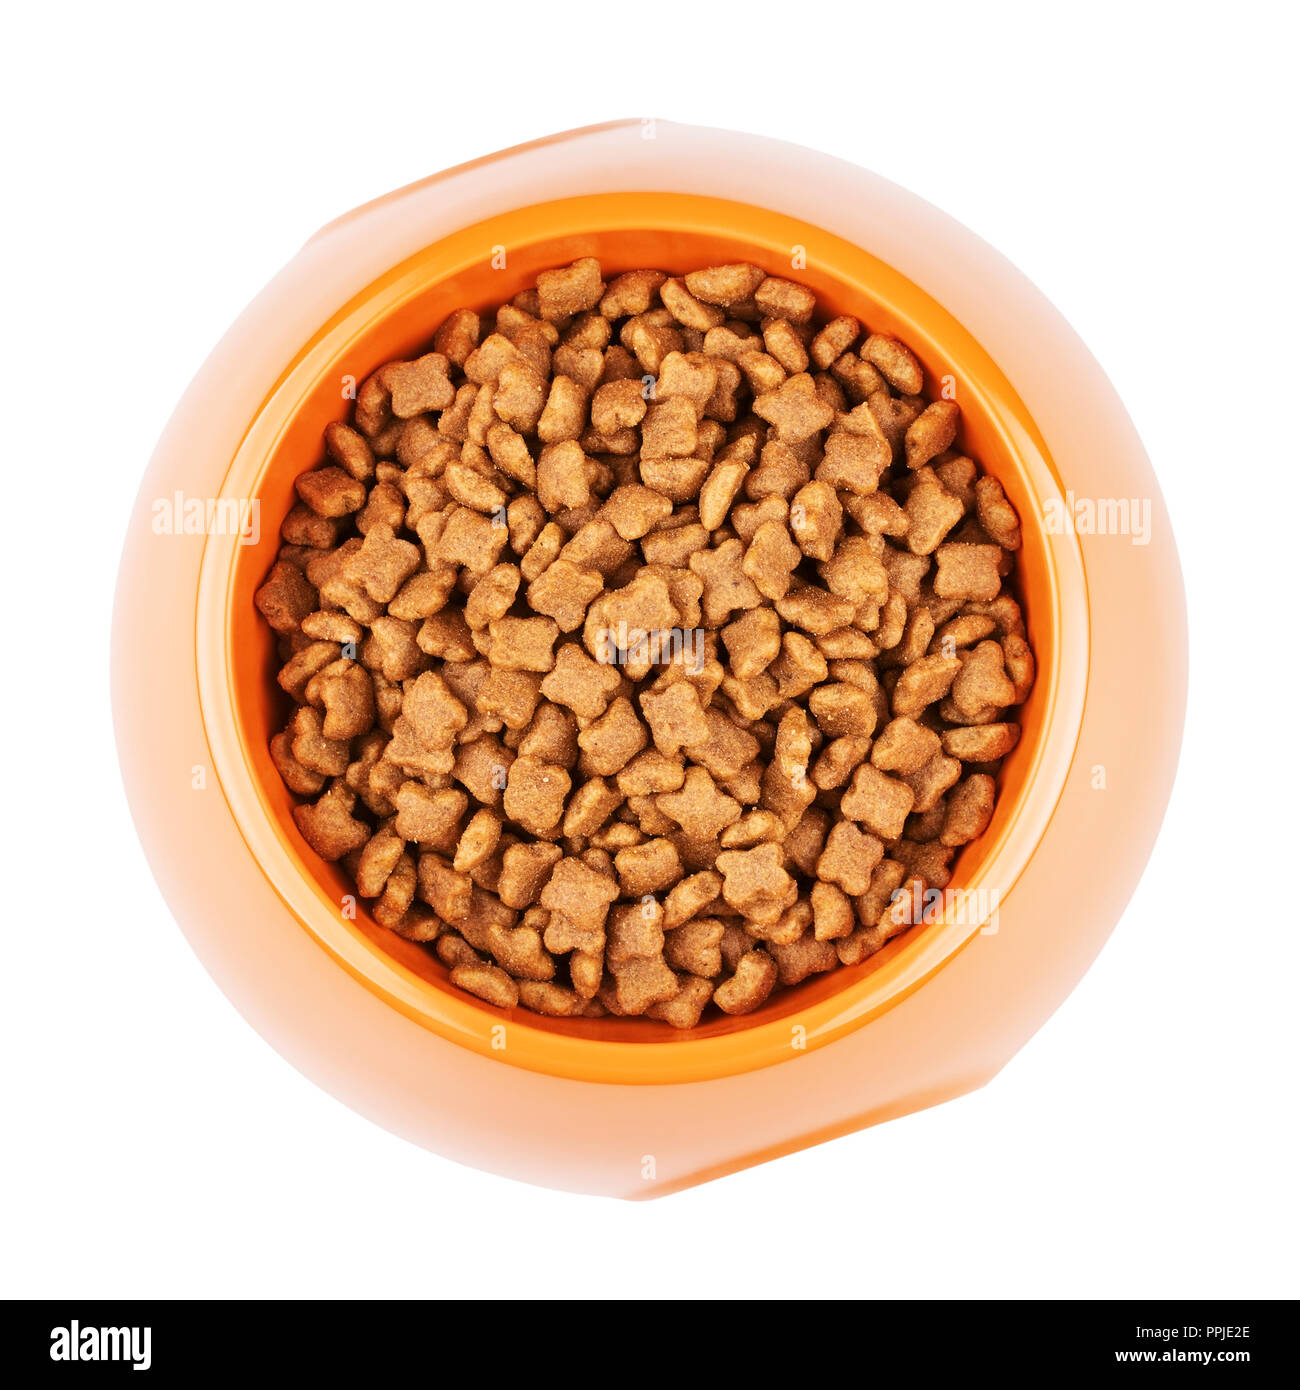 dry cat food in yellow bowl, isolated on white background Stock Photo